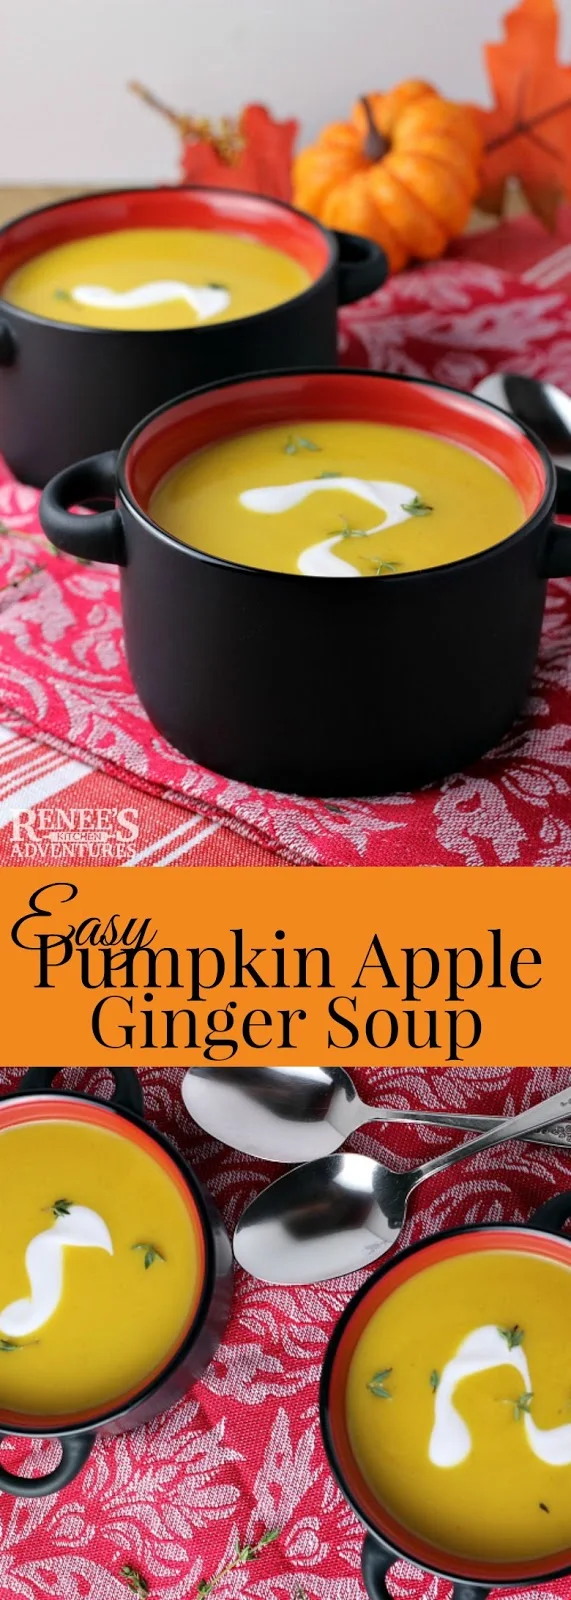 Easy Pumpkin Apple Ginger Soup | Renee's Kitchen Adventures - Easy healthy savory and sweet soup recipe perfect to serve at your holiday meal as an appetizer or for a light lunch #GiantEaglePerks #ad #soup #souprecipe #easyrecipeforsoup #easysouprecipe #pumpkinsoup #squashsoup #Thanksgiving